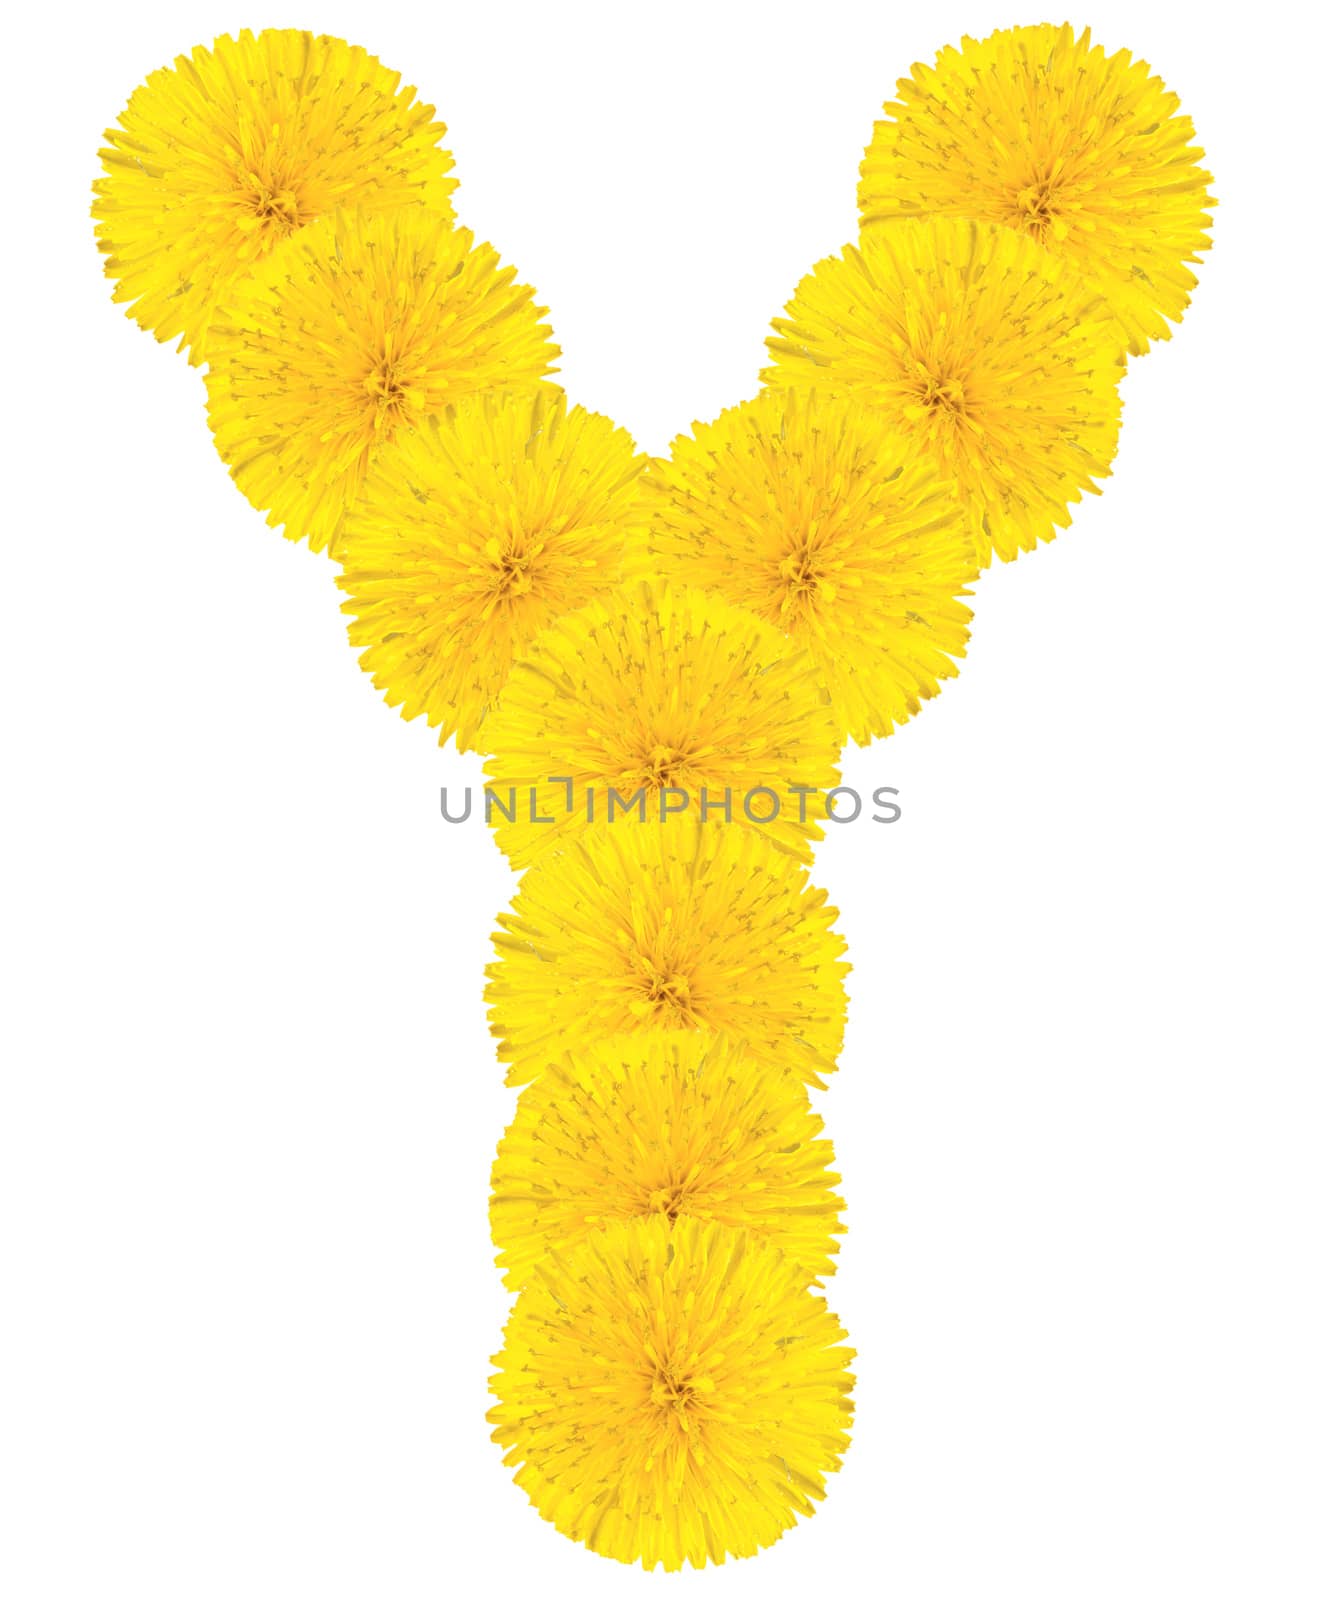 Letter Y made from dandelions by Valengilda